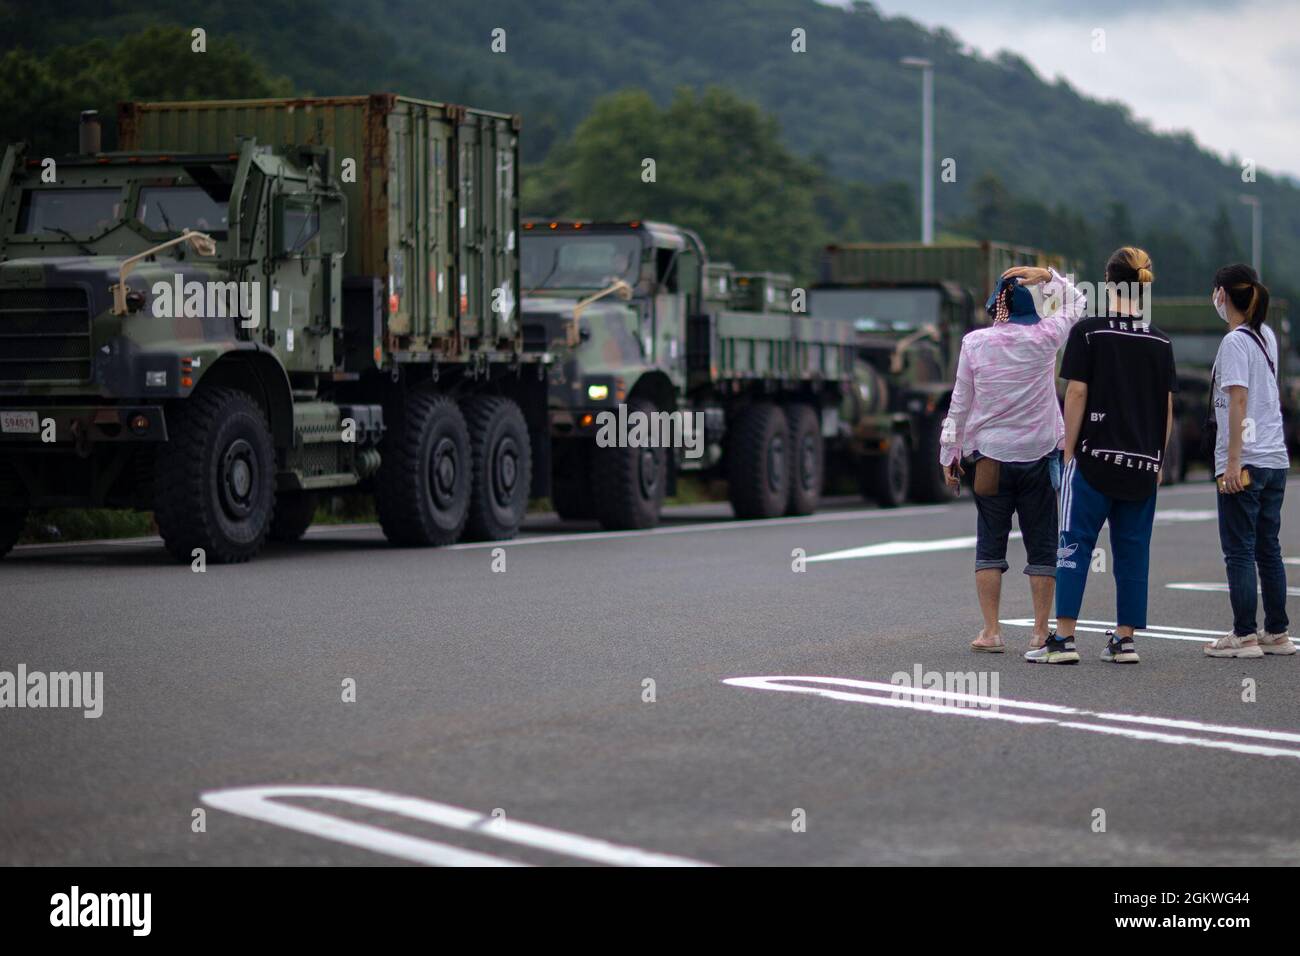 Japanese locals point at a 7-ton truck during a convoy at a rest stop in Japan, July 10, 2021. U.S. Marines with MWSS-171 began Eagle Wrath 21, a two-week exercise at CATC Camp Fuji to maintain a high level of proficiency and combat readiness. Stock Photo